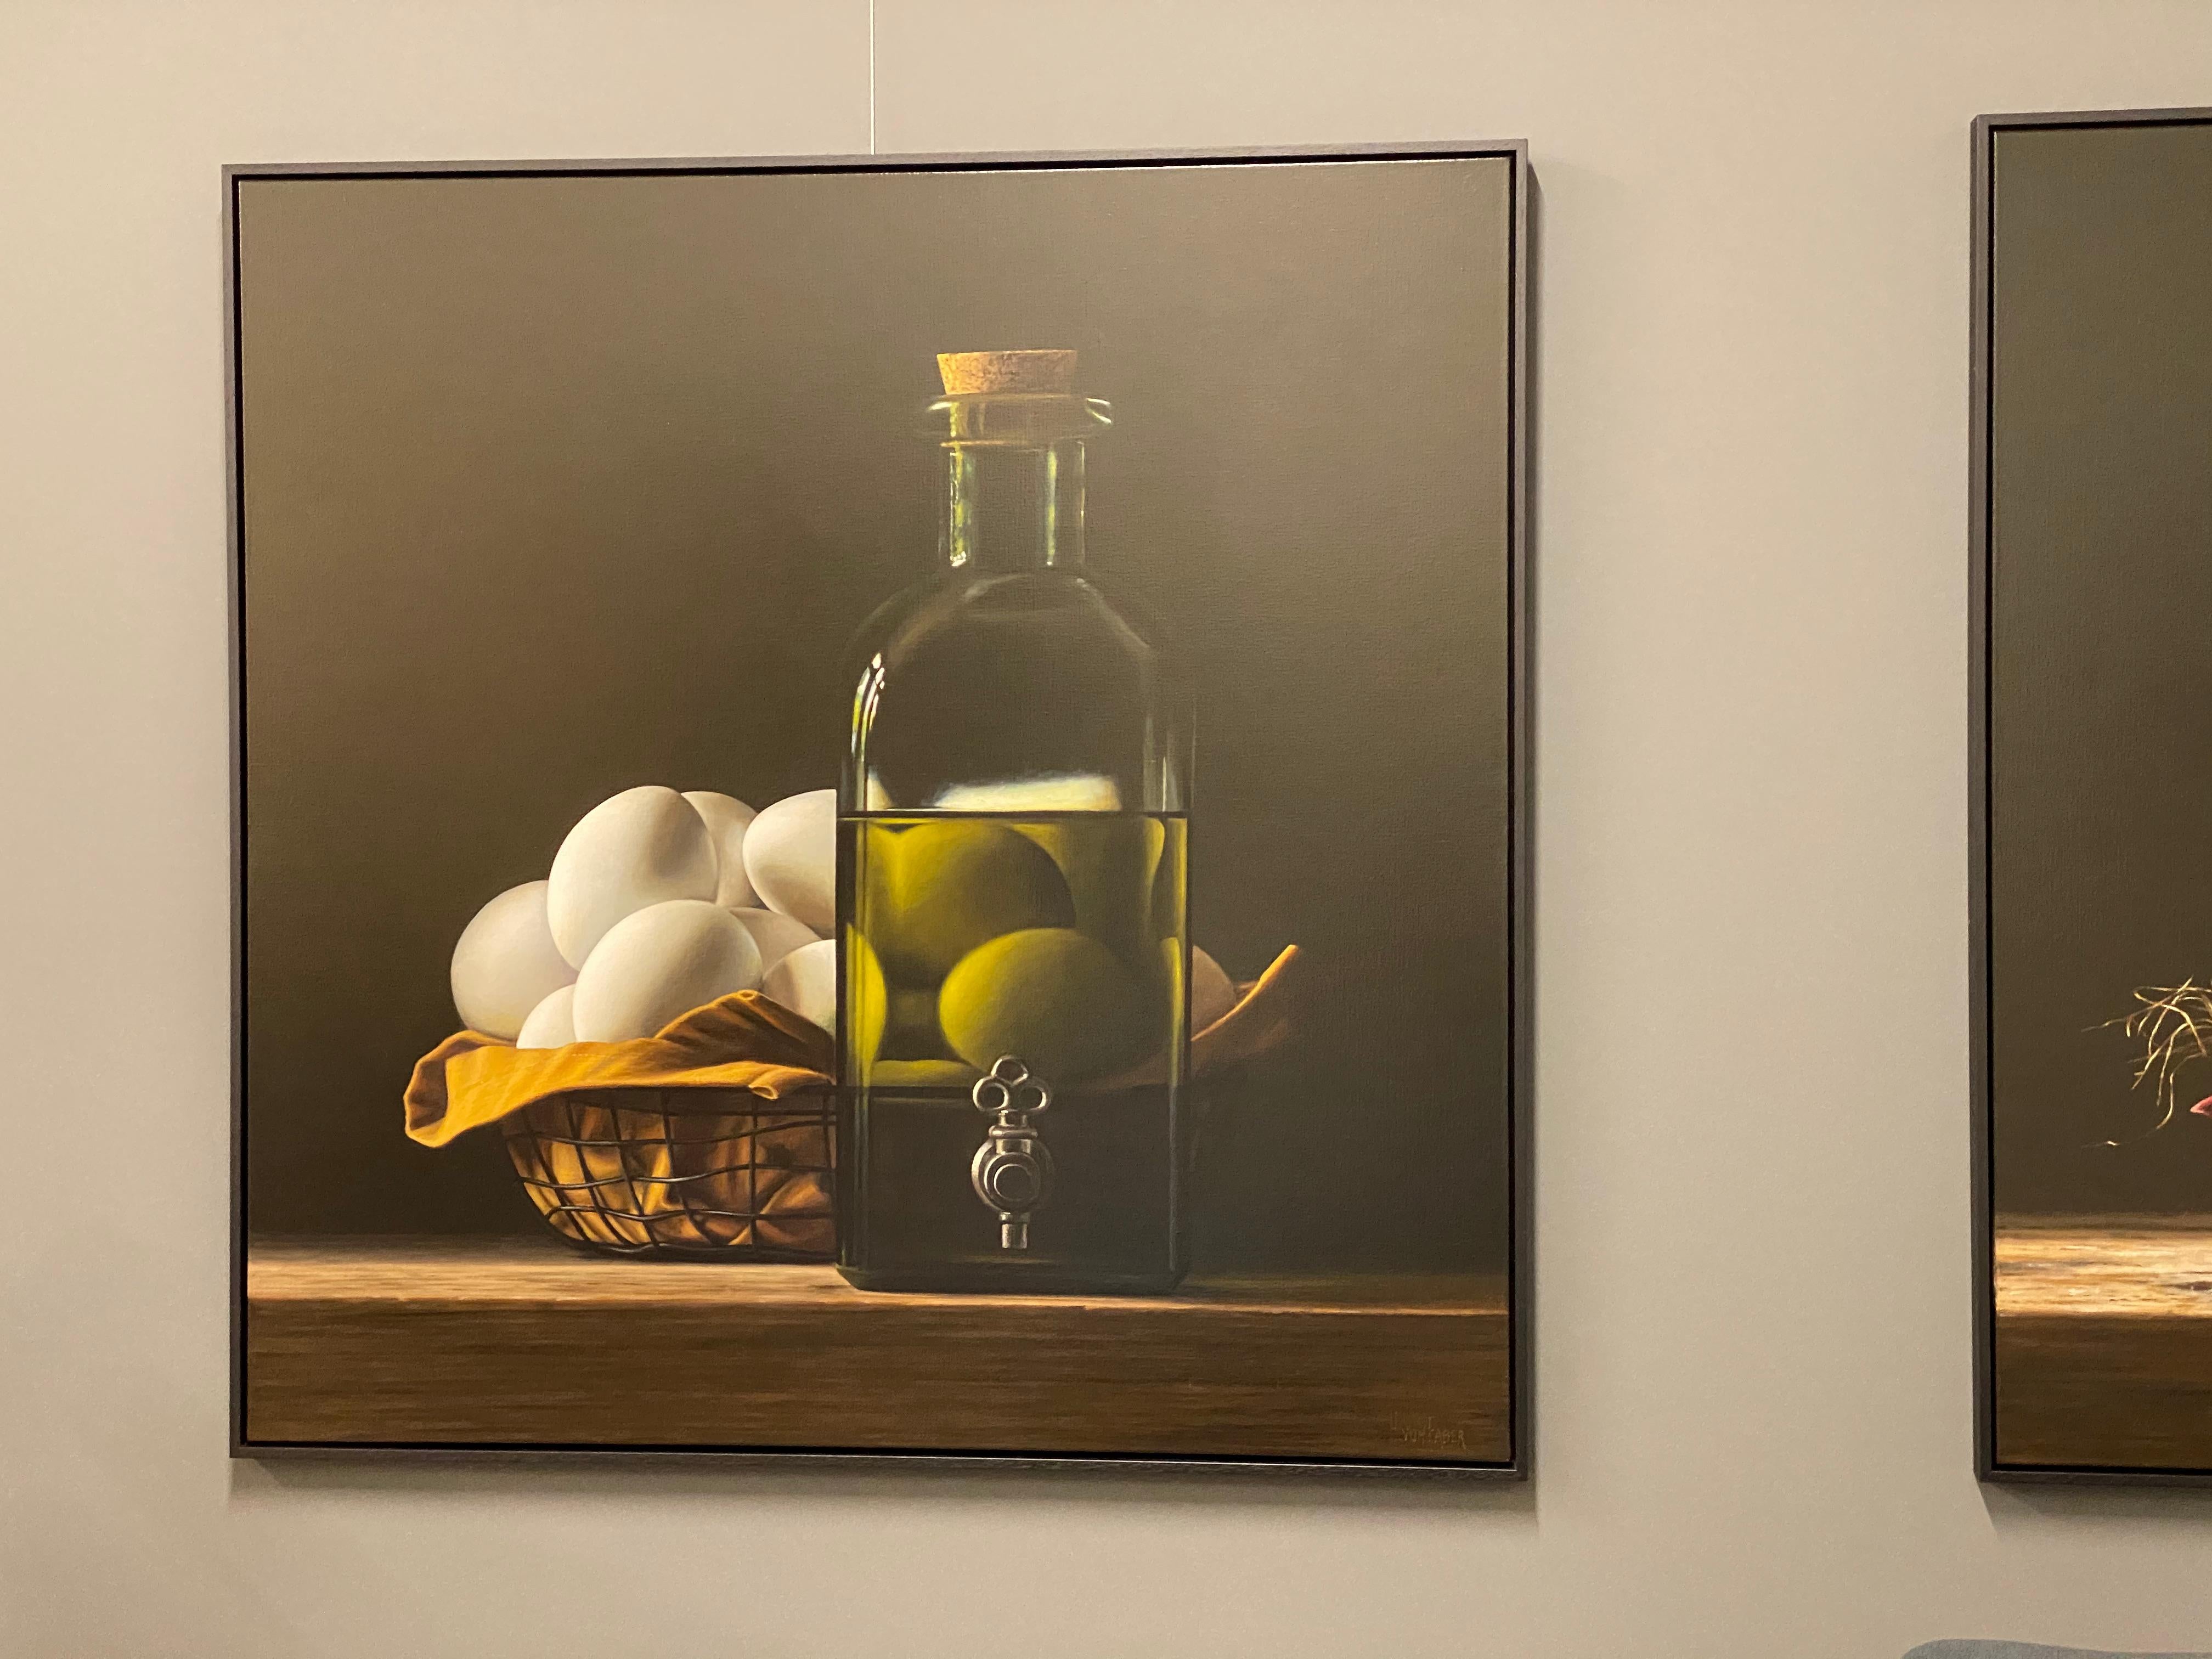 Bottle of Oil with Eggs- 21st Century Contemporary Still-life Painting with Eggs - Black Figurative Painting by Heidi von Faber